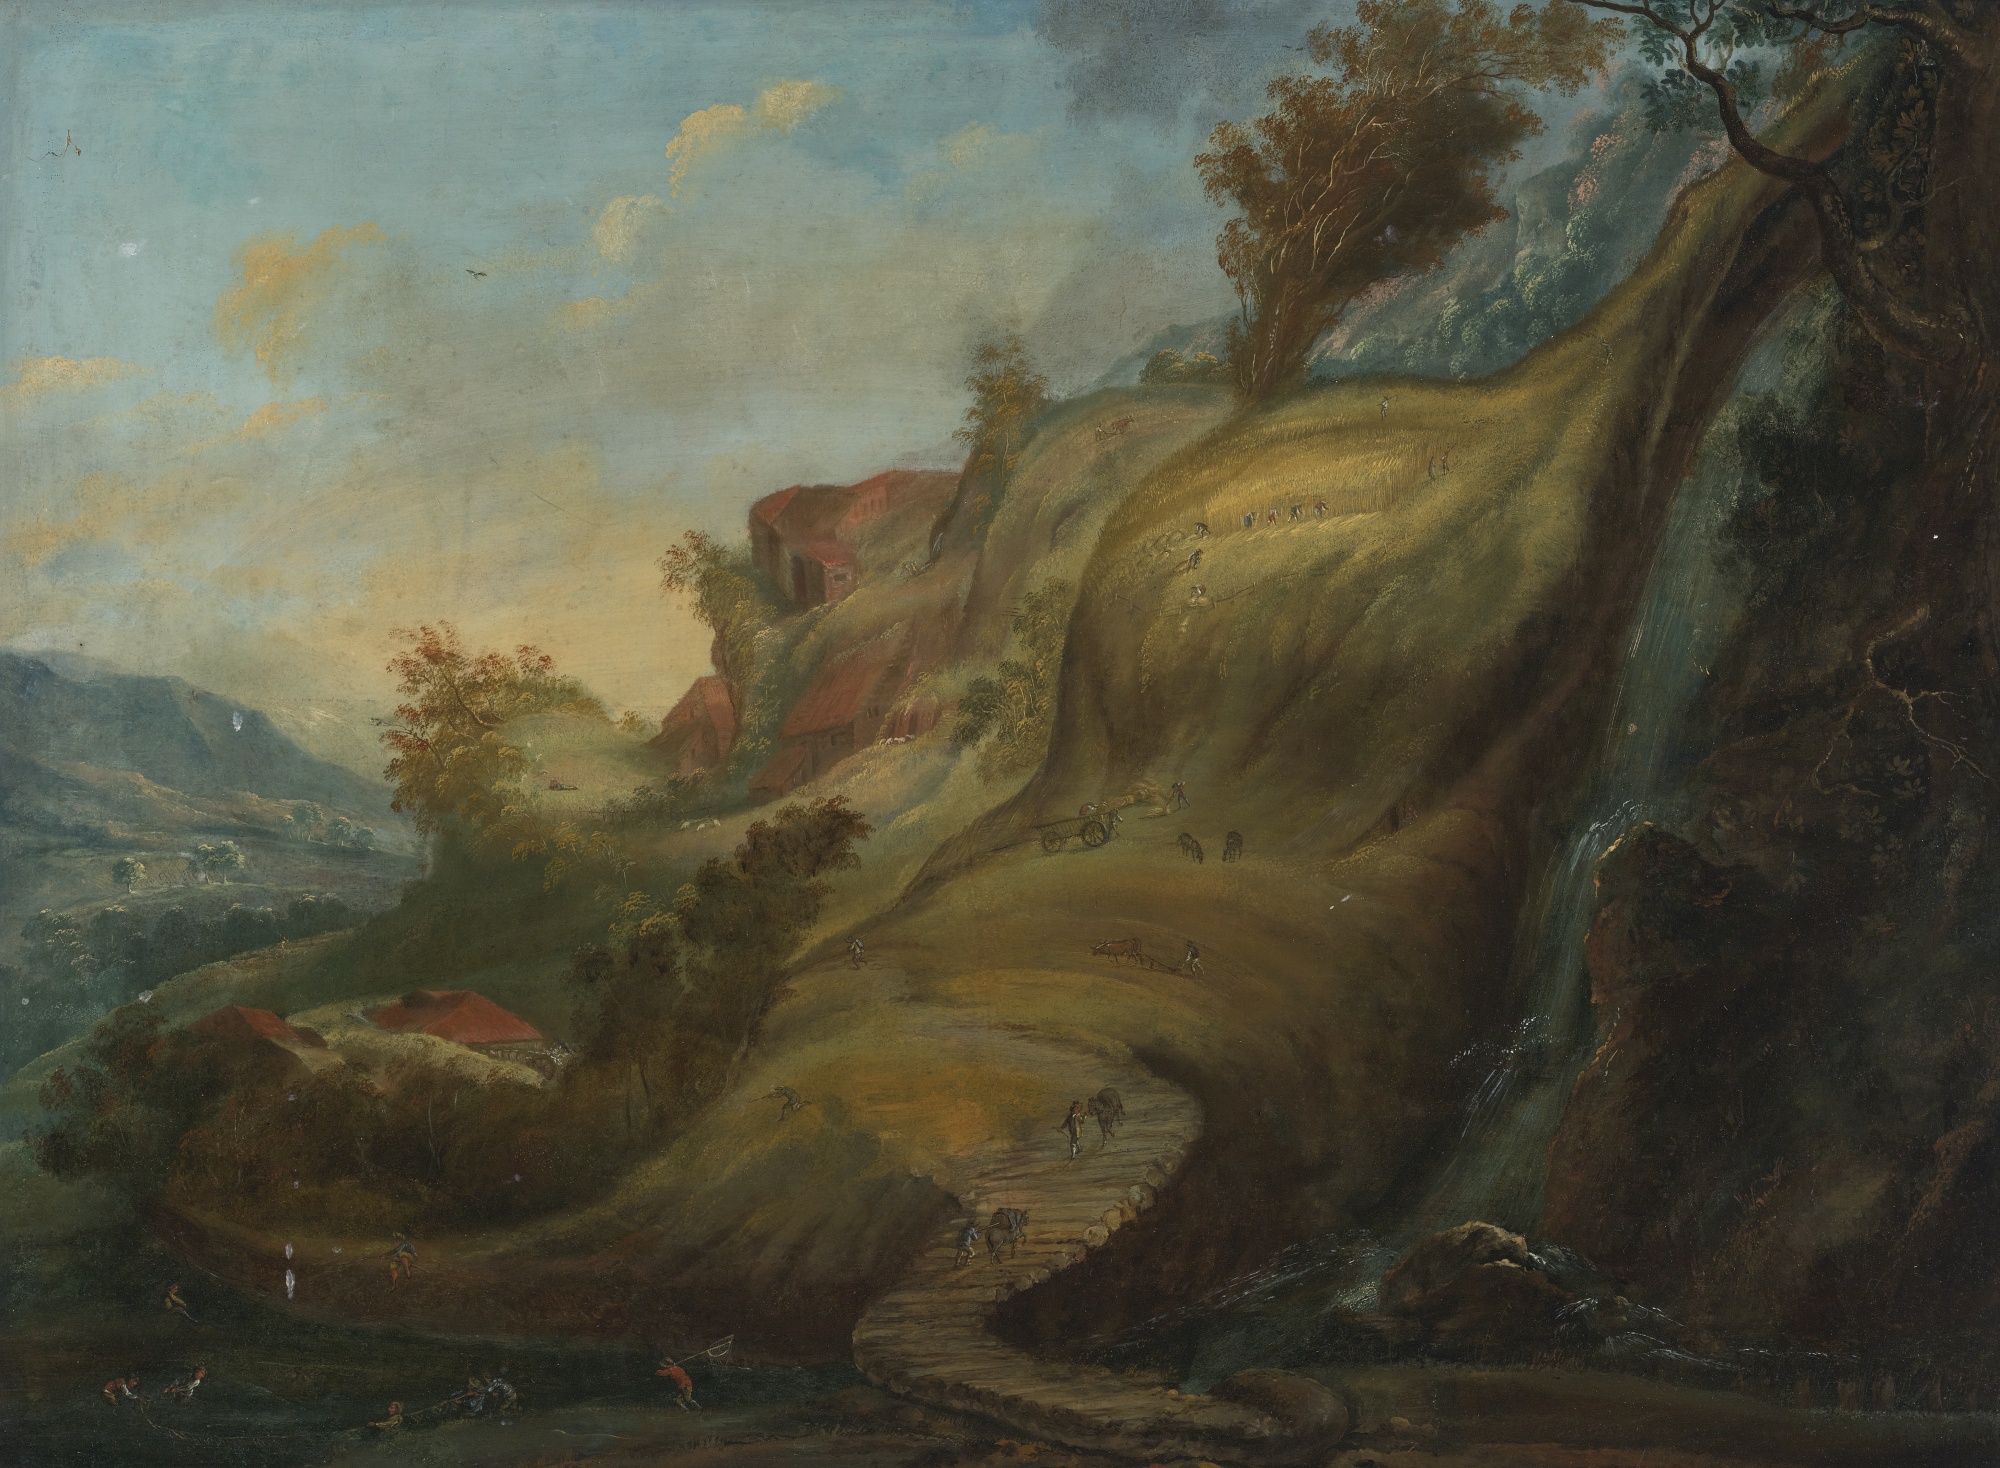 Flemish School, Early 17th Century A Hilly Landscape with an anthropomorphic Design